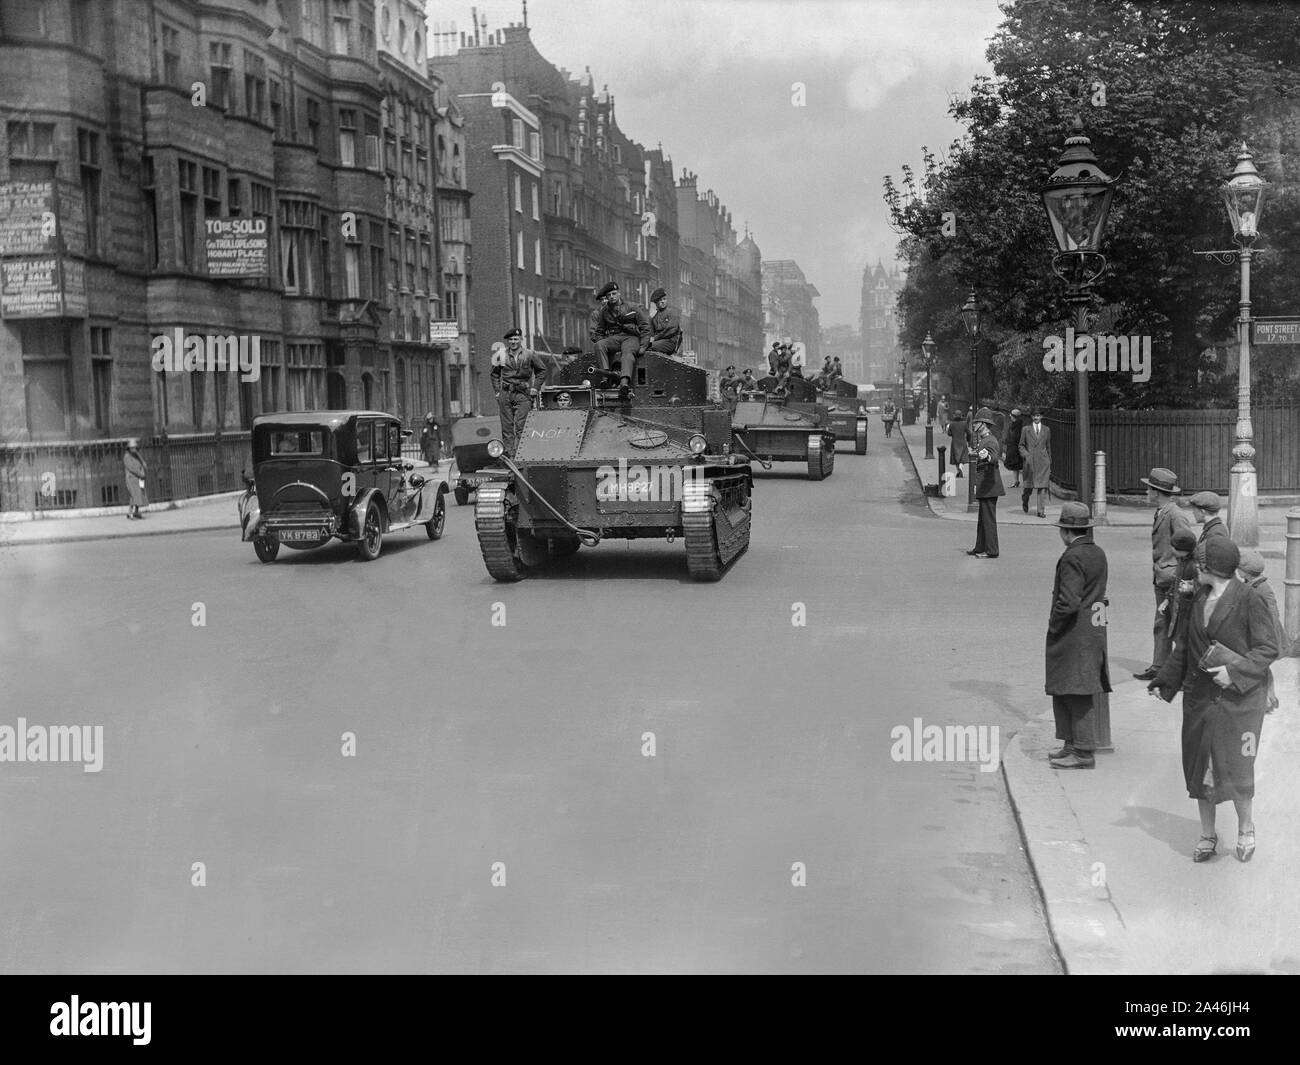 12th May 1926. Port Street, London, England. Troops in armoured cars on the streets of London in an attempt to keep control and maintain basic services, during the General Strike in the UK, that lasted from 3rd to 12th may 1926. Stock Photo